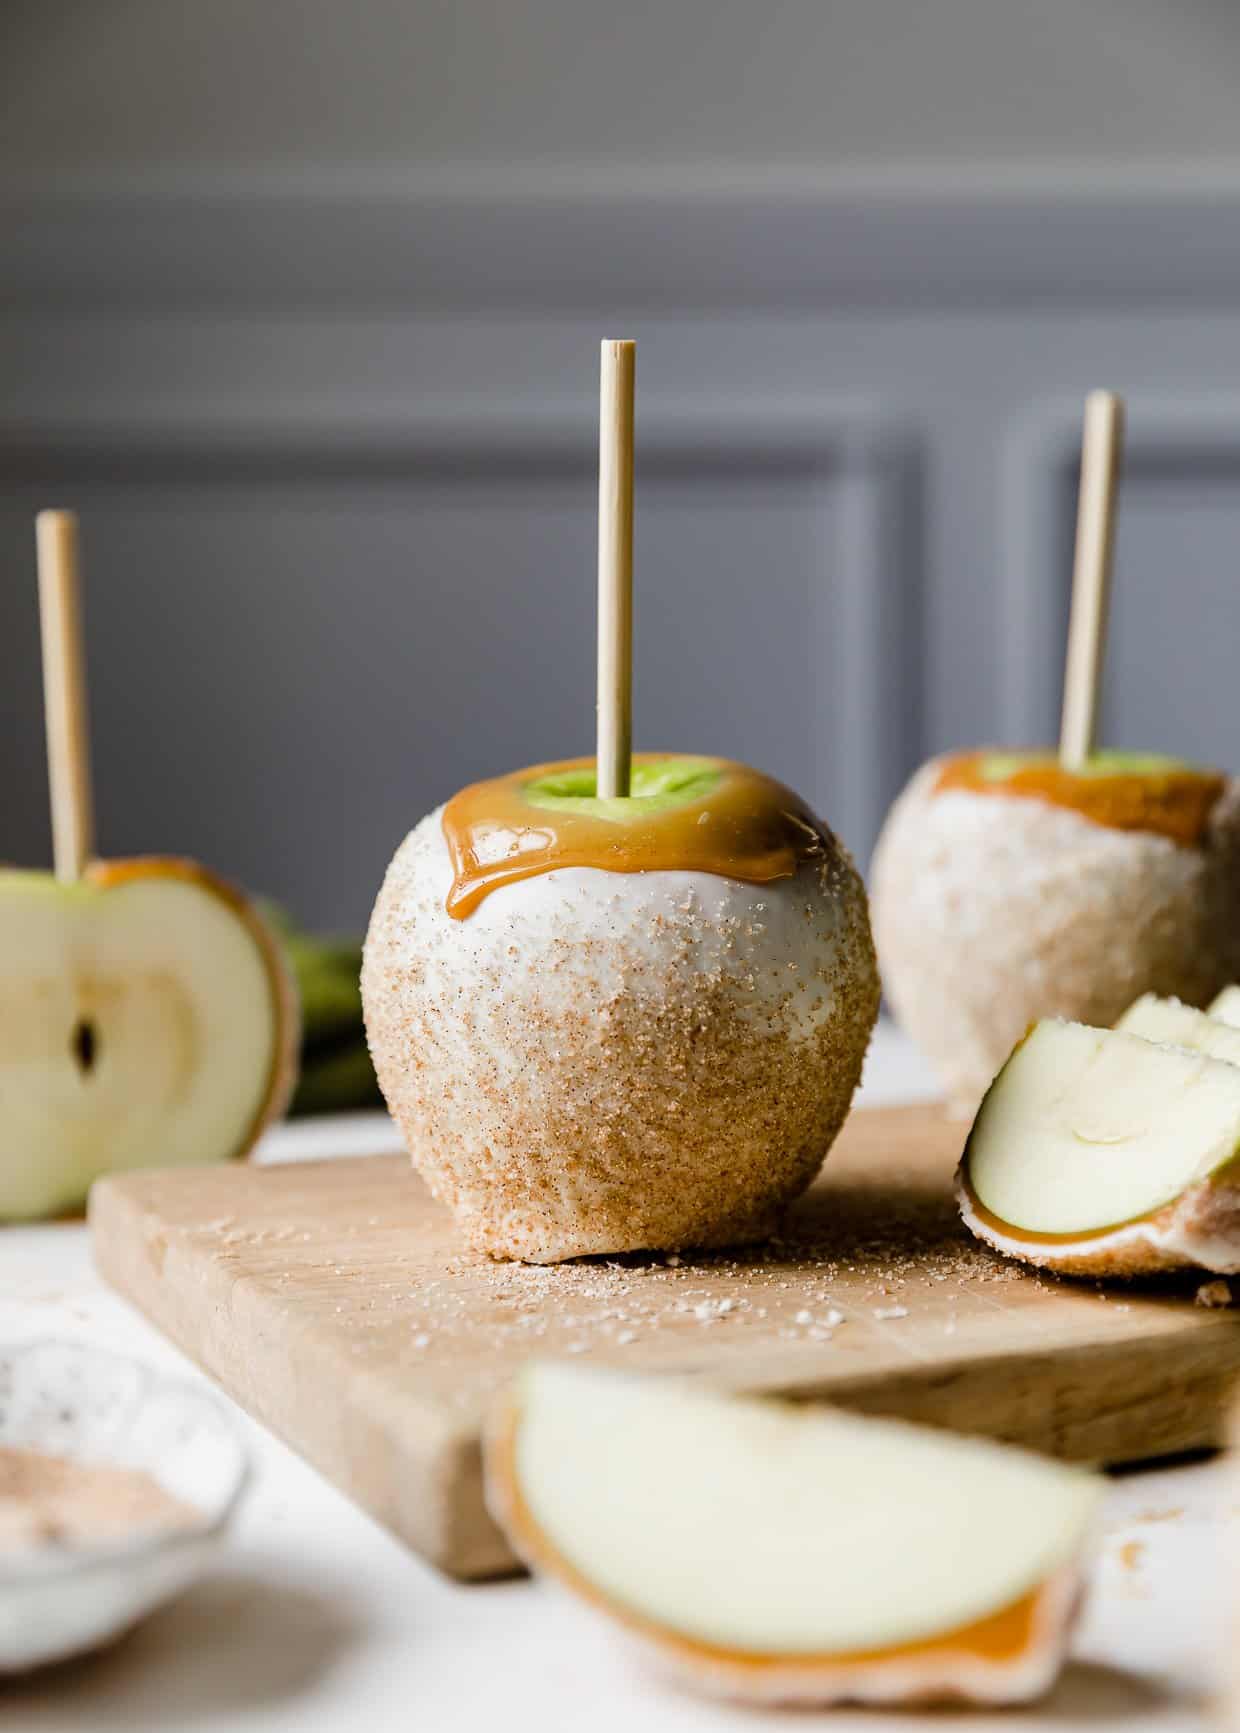 An apple pie caramel apple dipped in caramel, coated with white chocolate and sprinkled with cinnamon sugar.